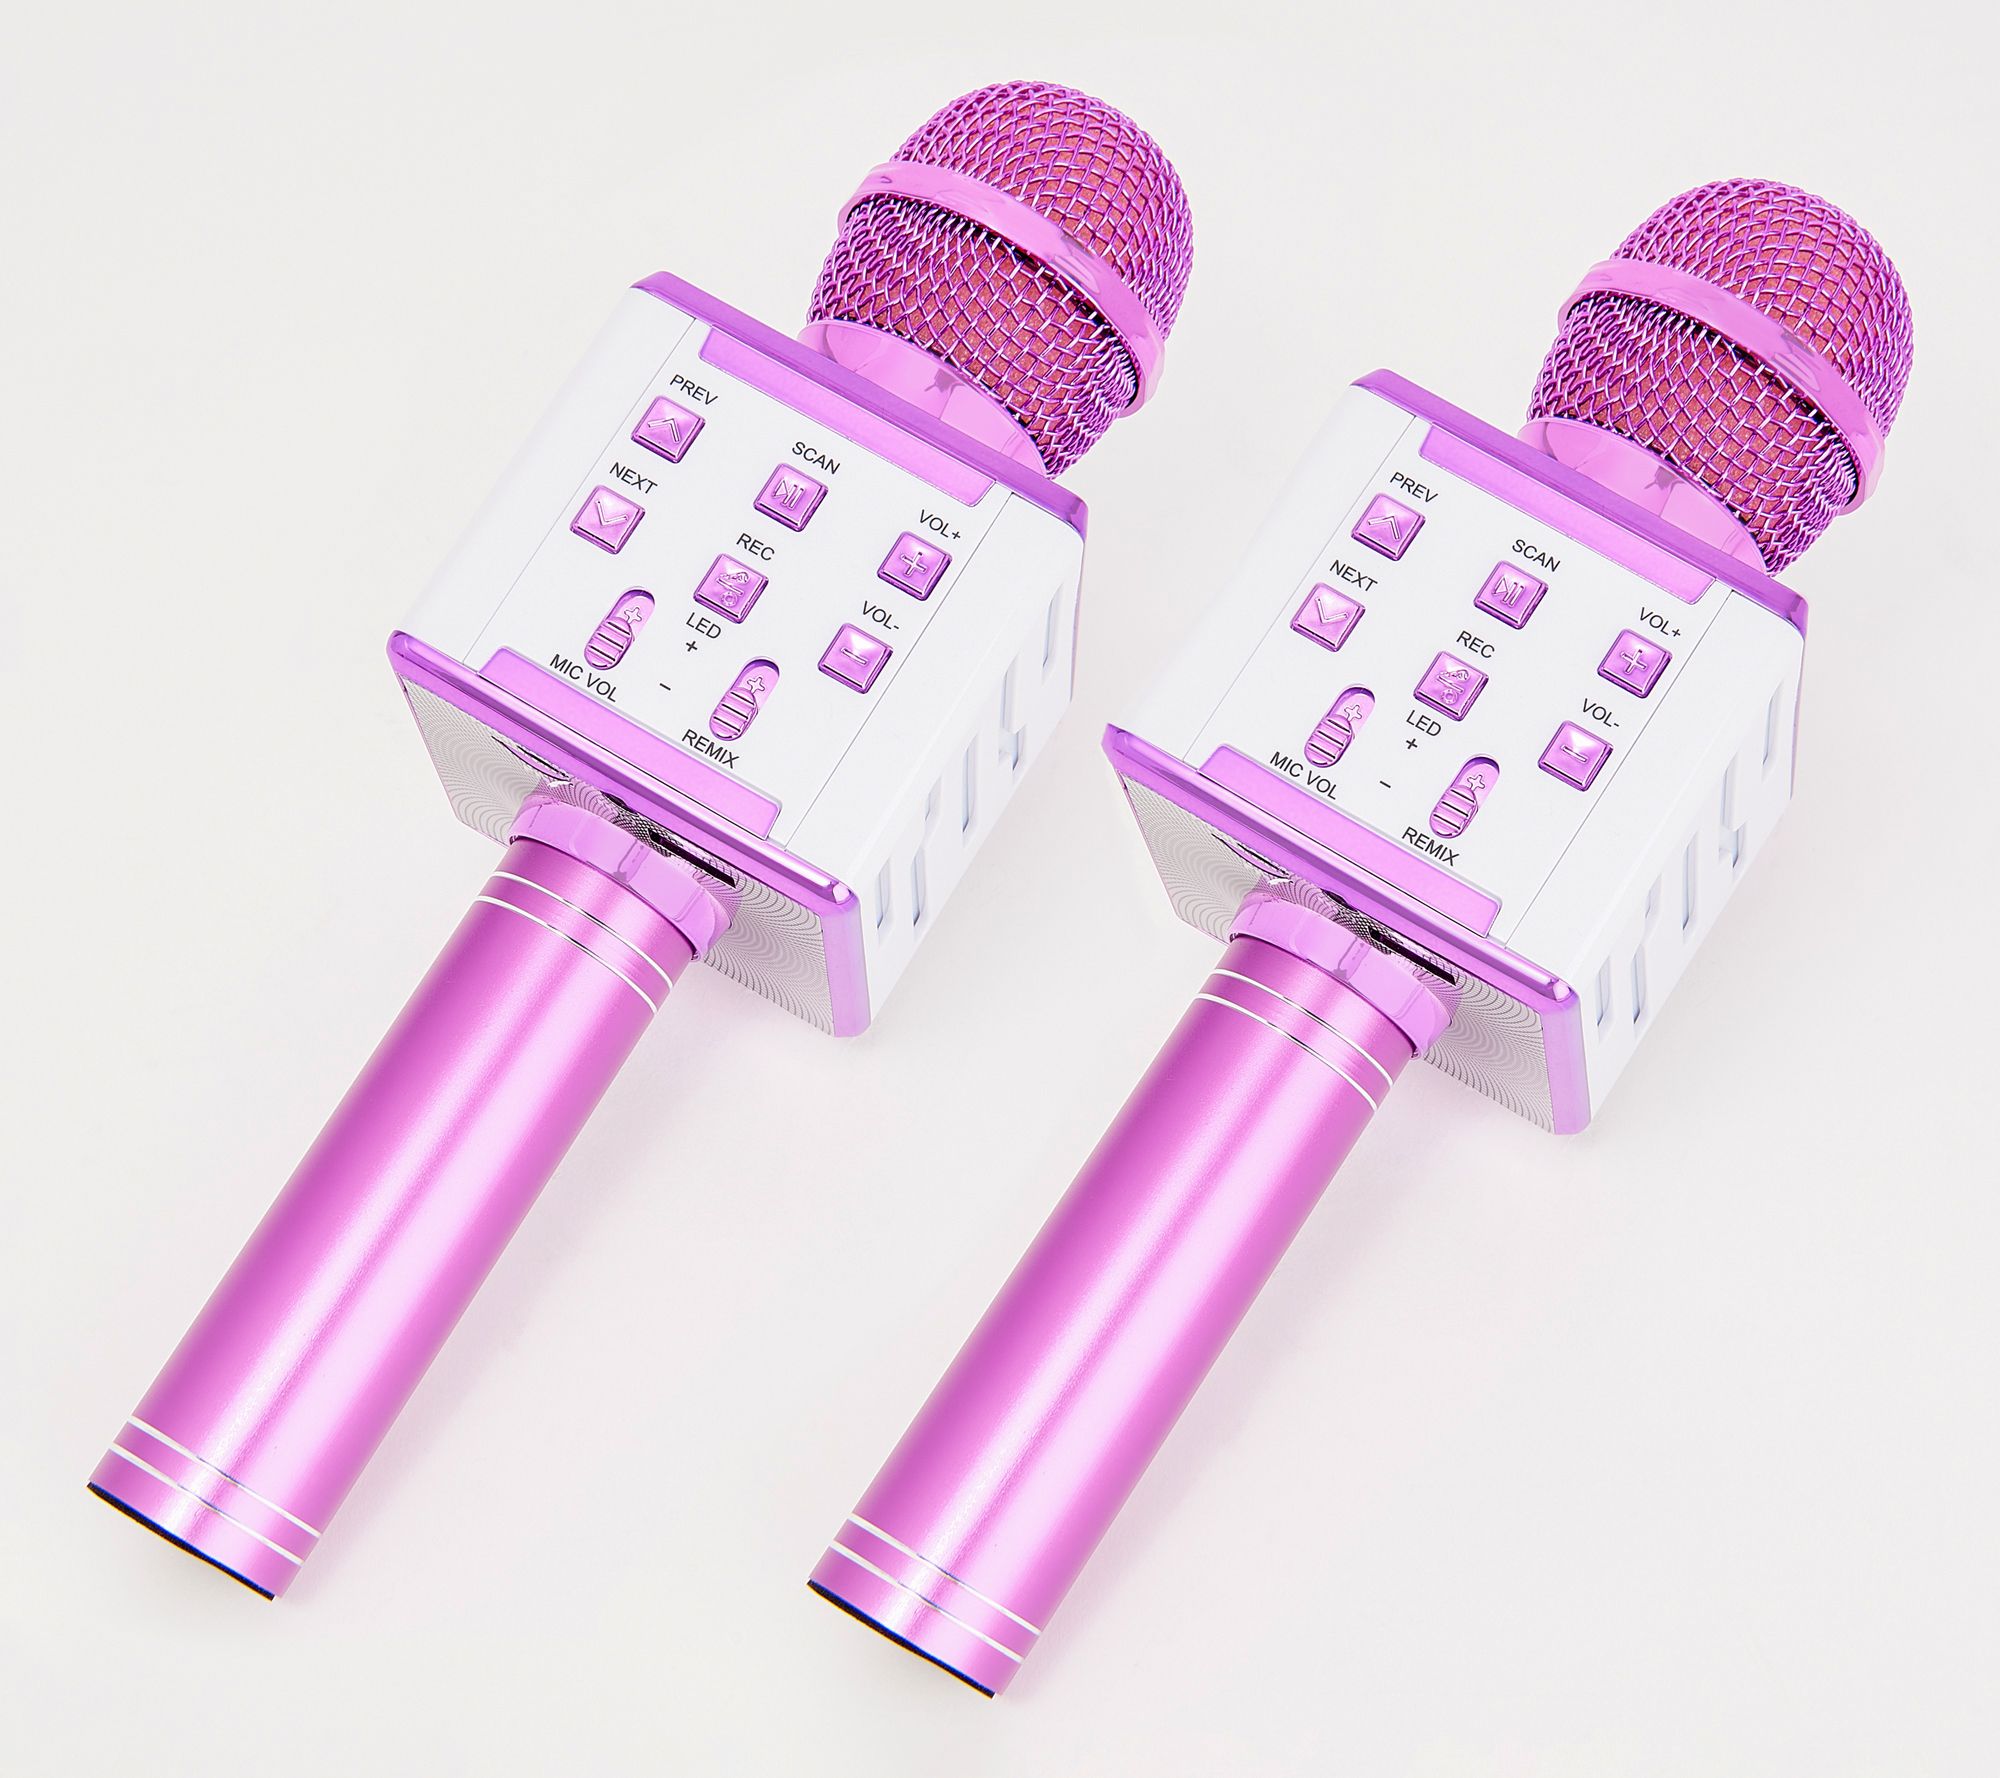 colorful microphones